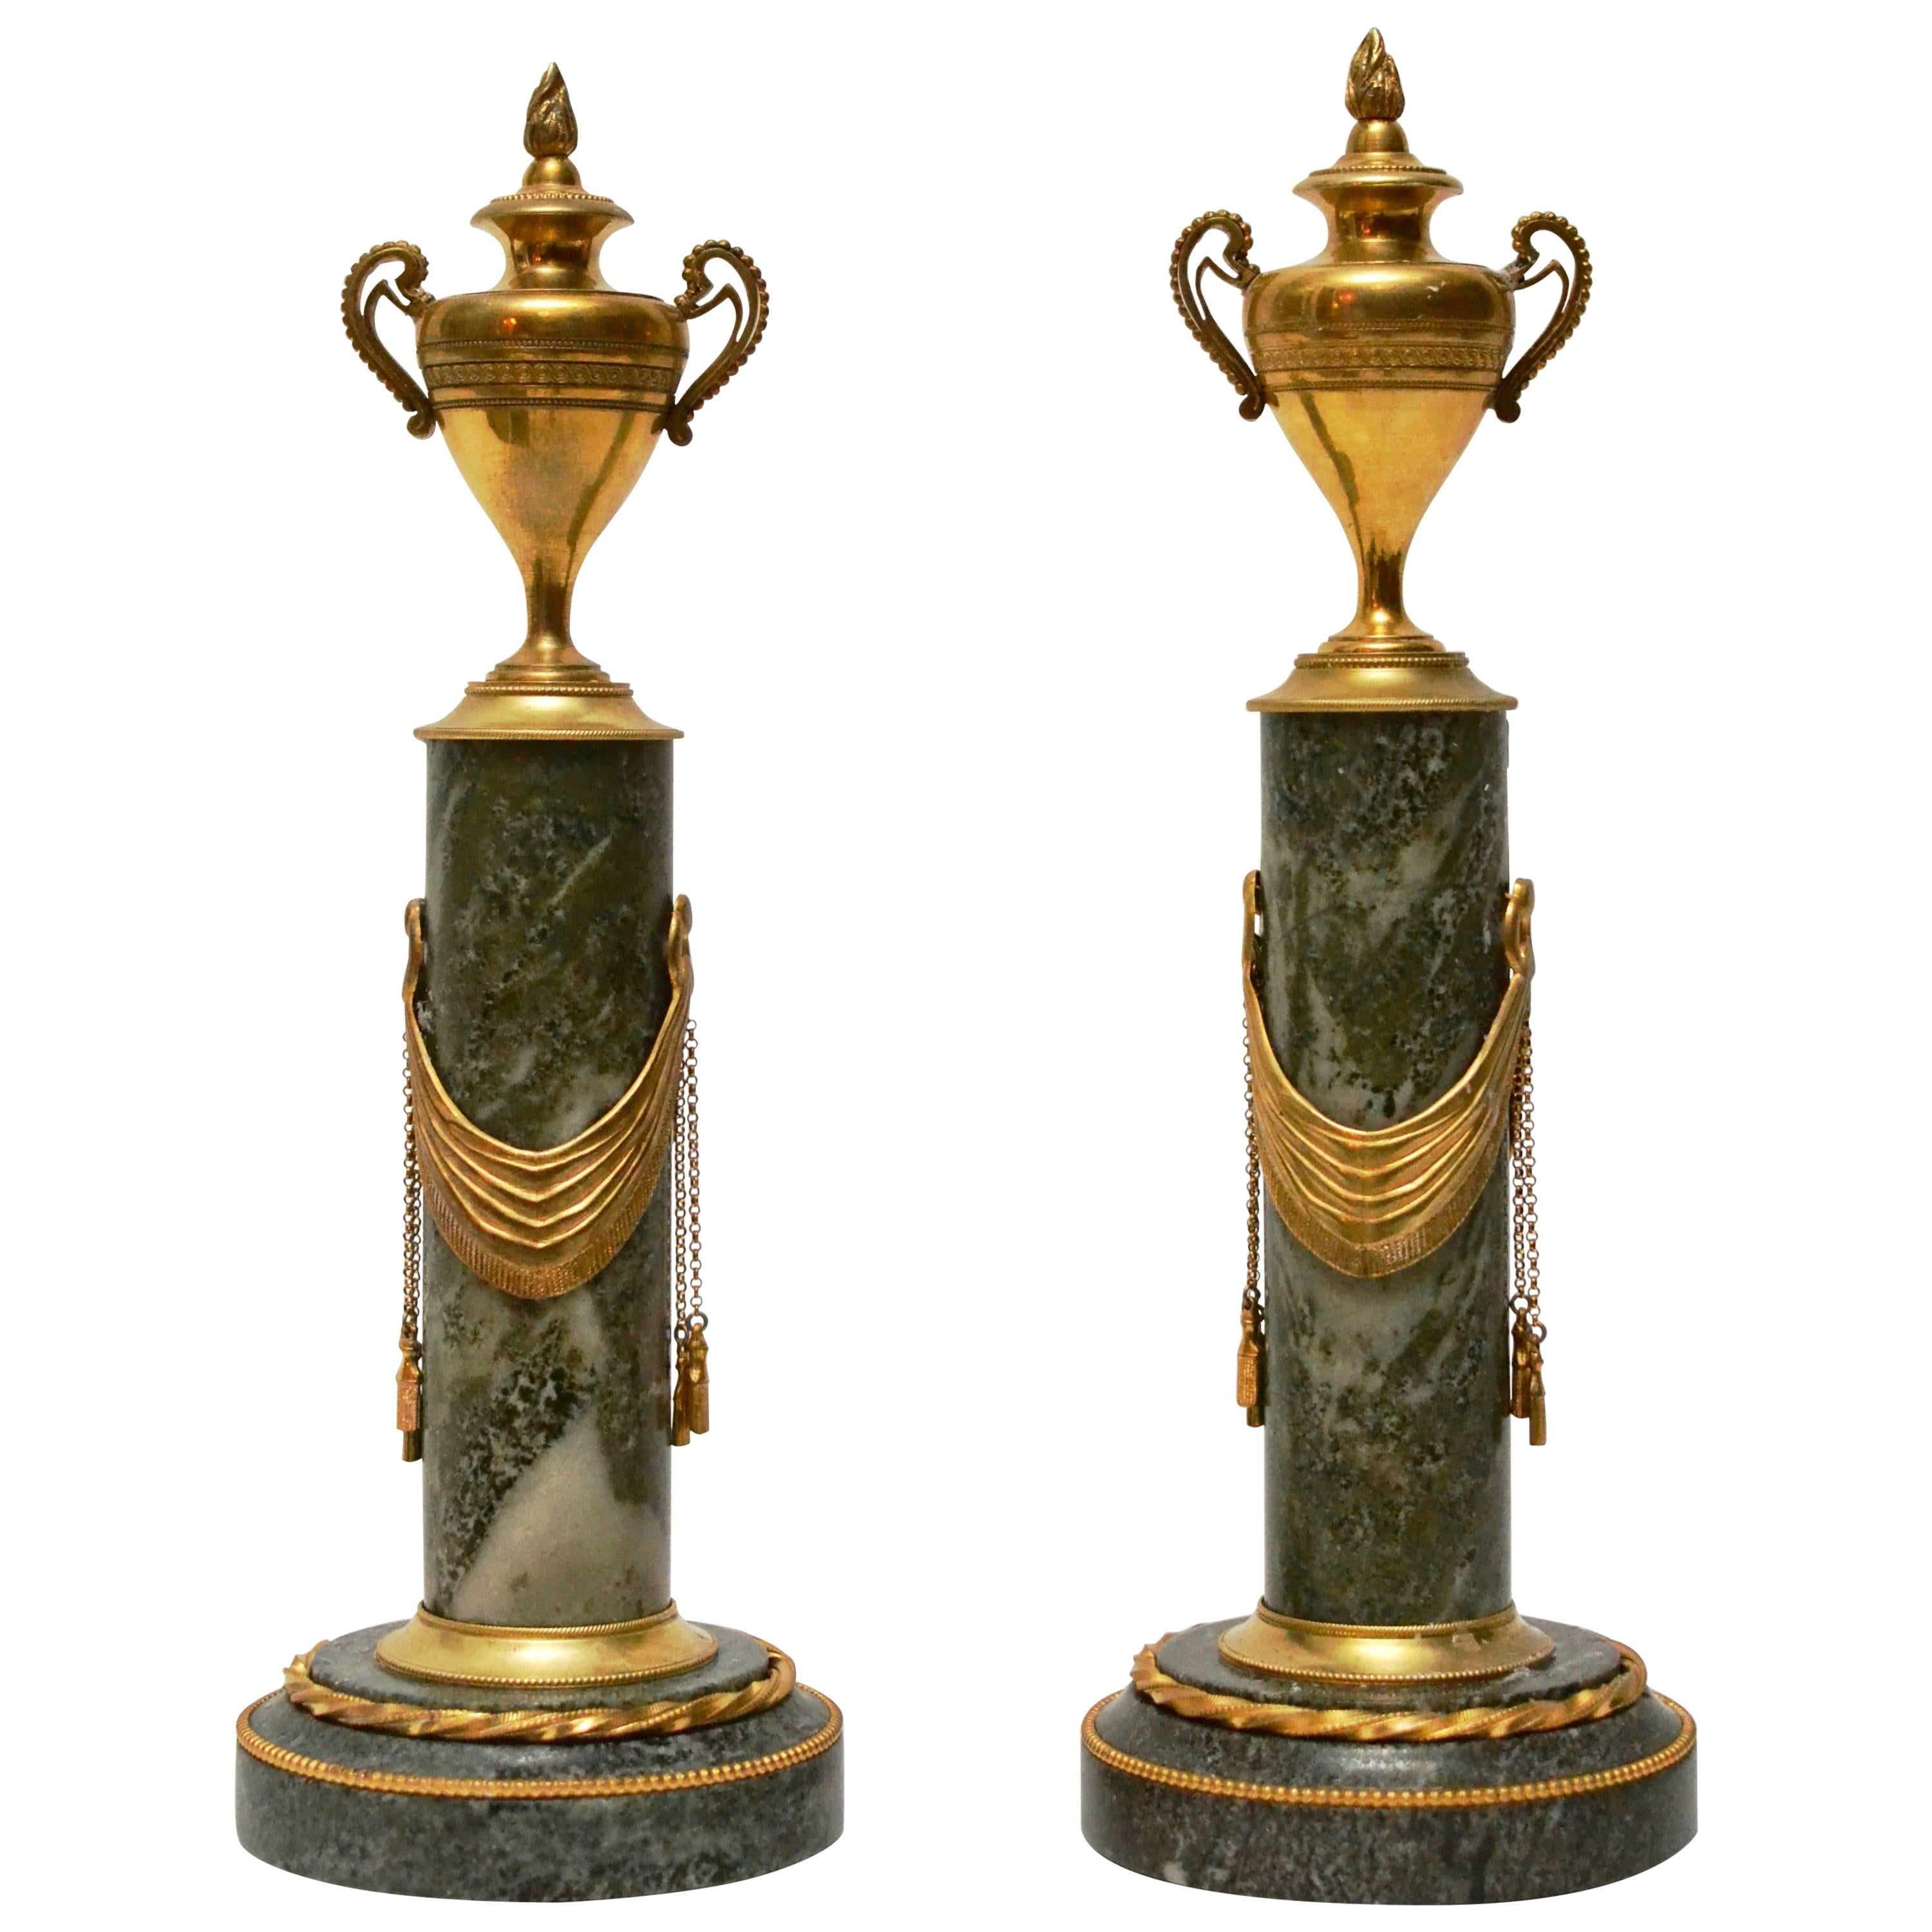 Pair of Gustavian Marble and Gilt Bronze Cassolettes, 19th Century